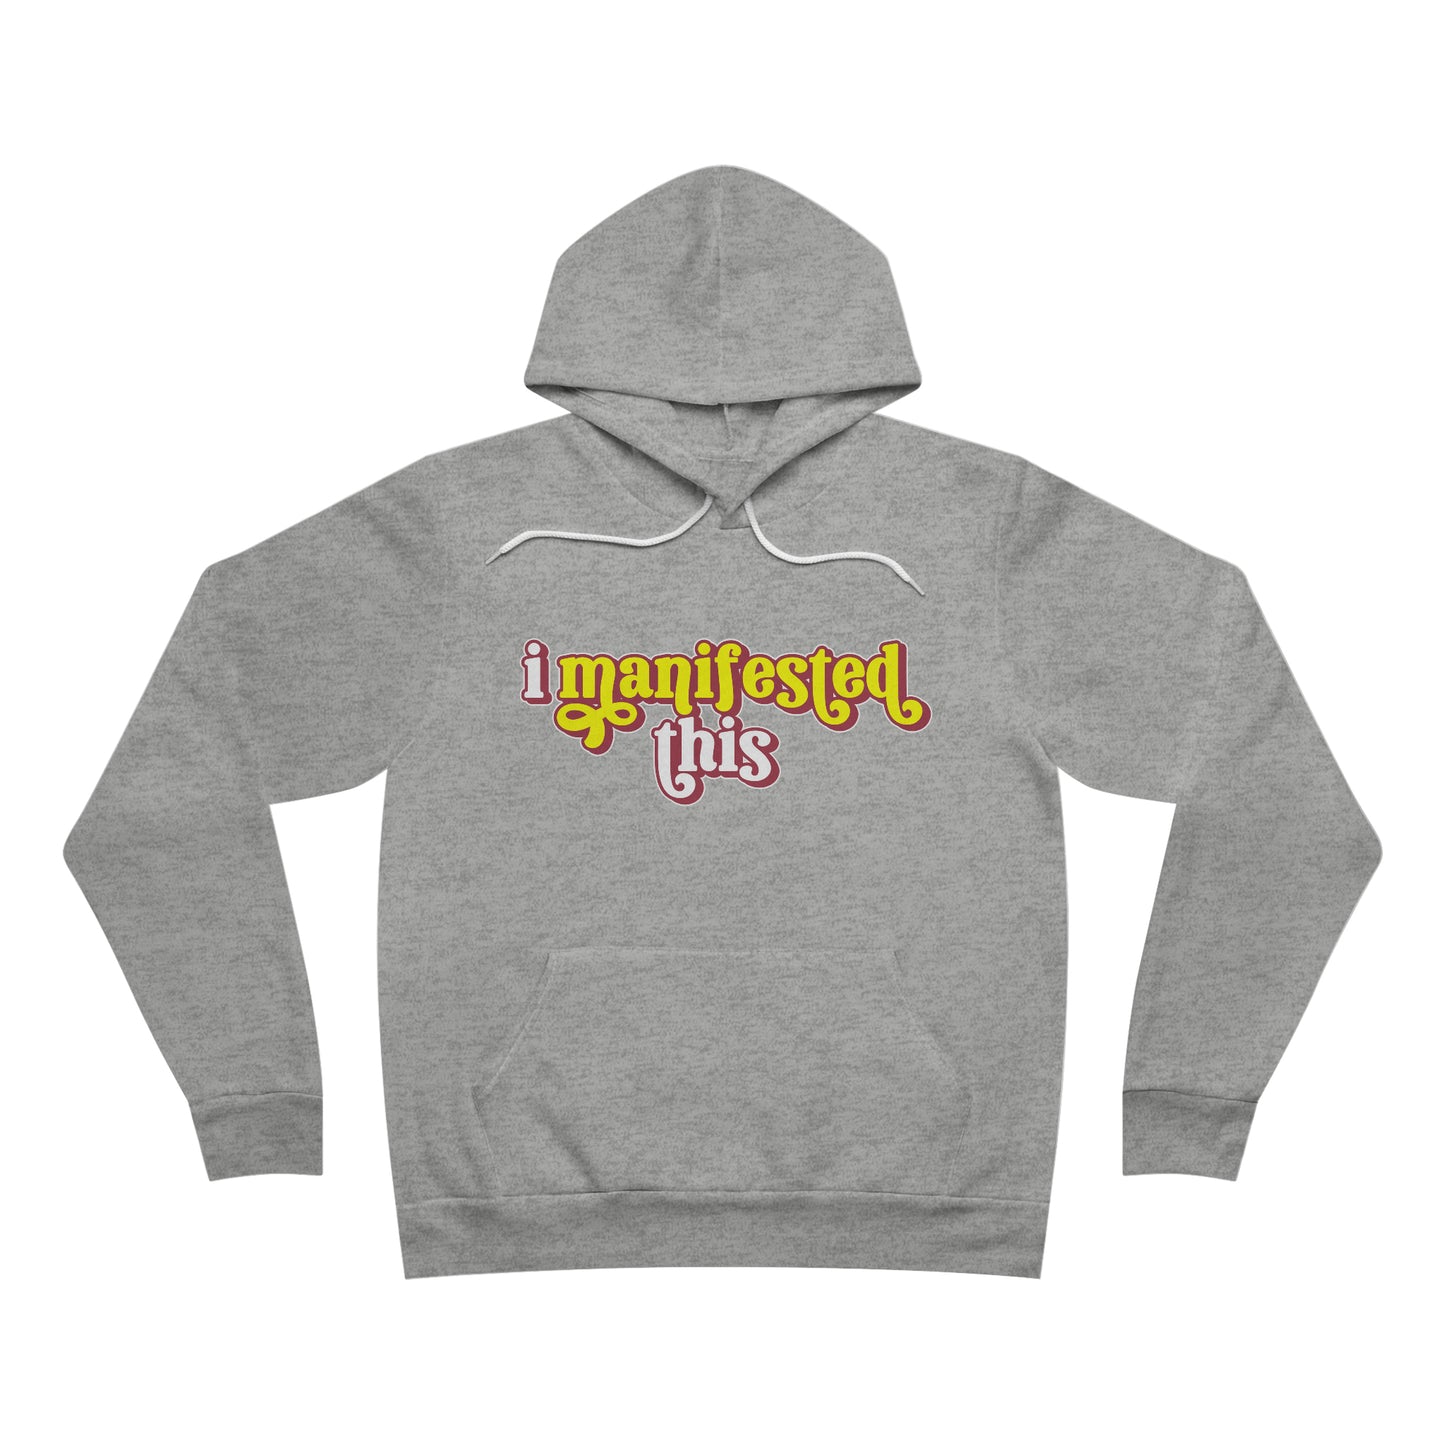 I Manifested This Fleece Pullover Hoodie